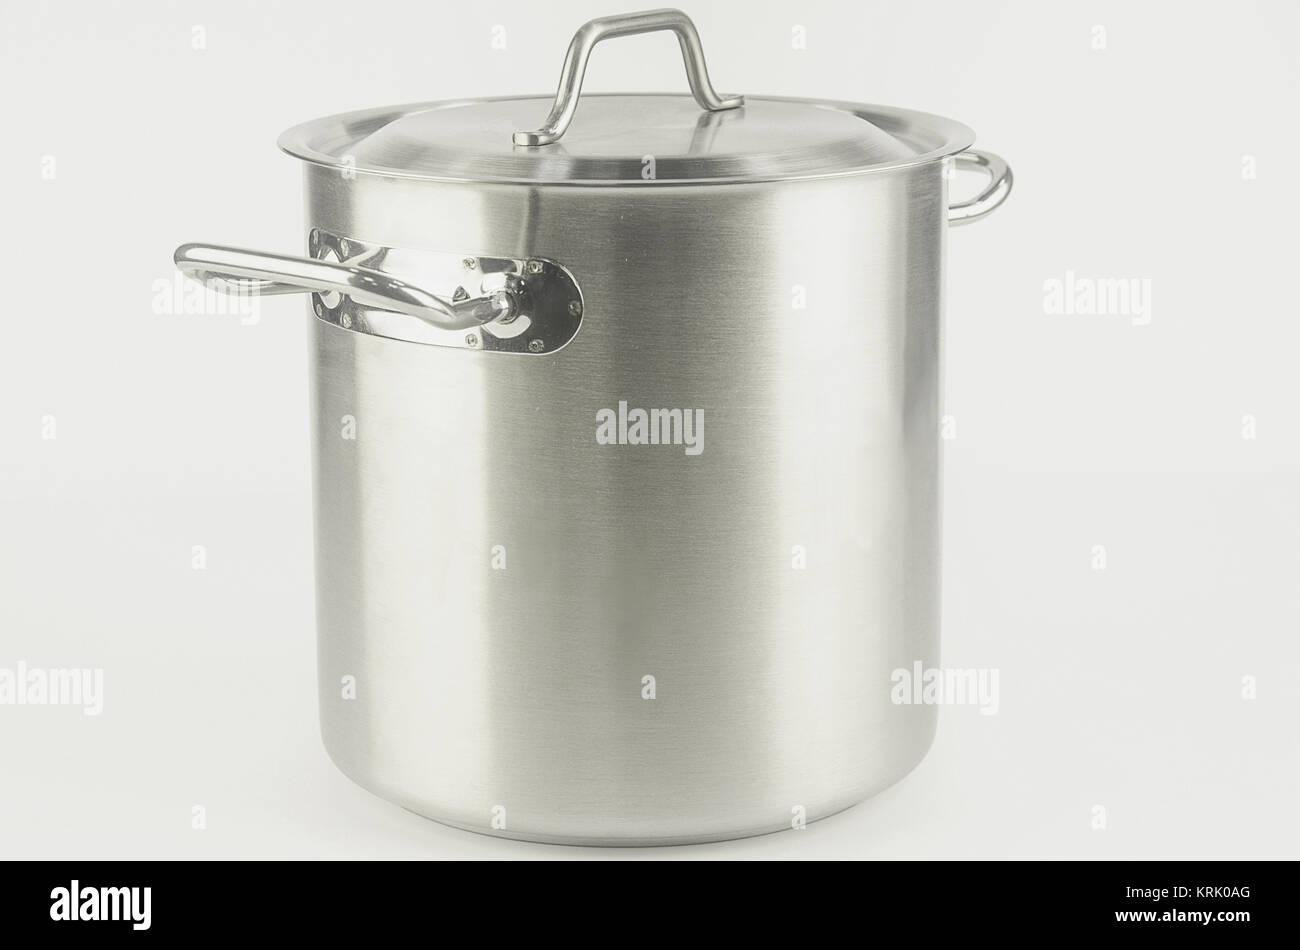 Giant cooking pot stock photo. Image of metal, cooking - 61397476